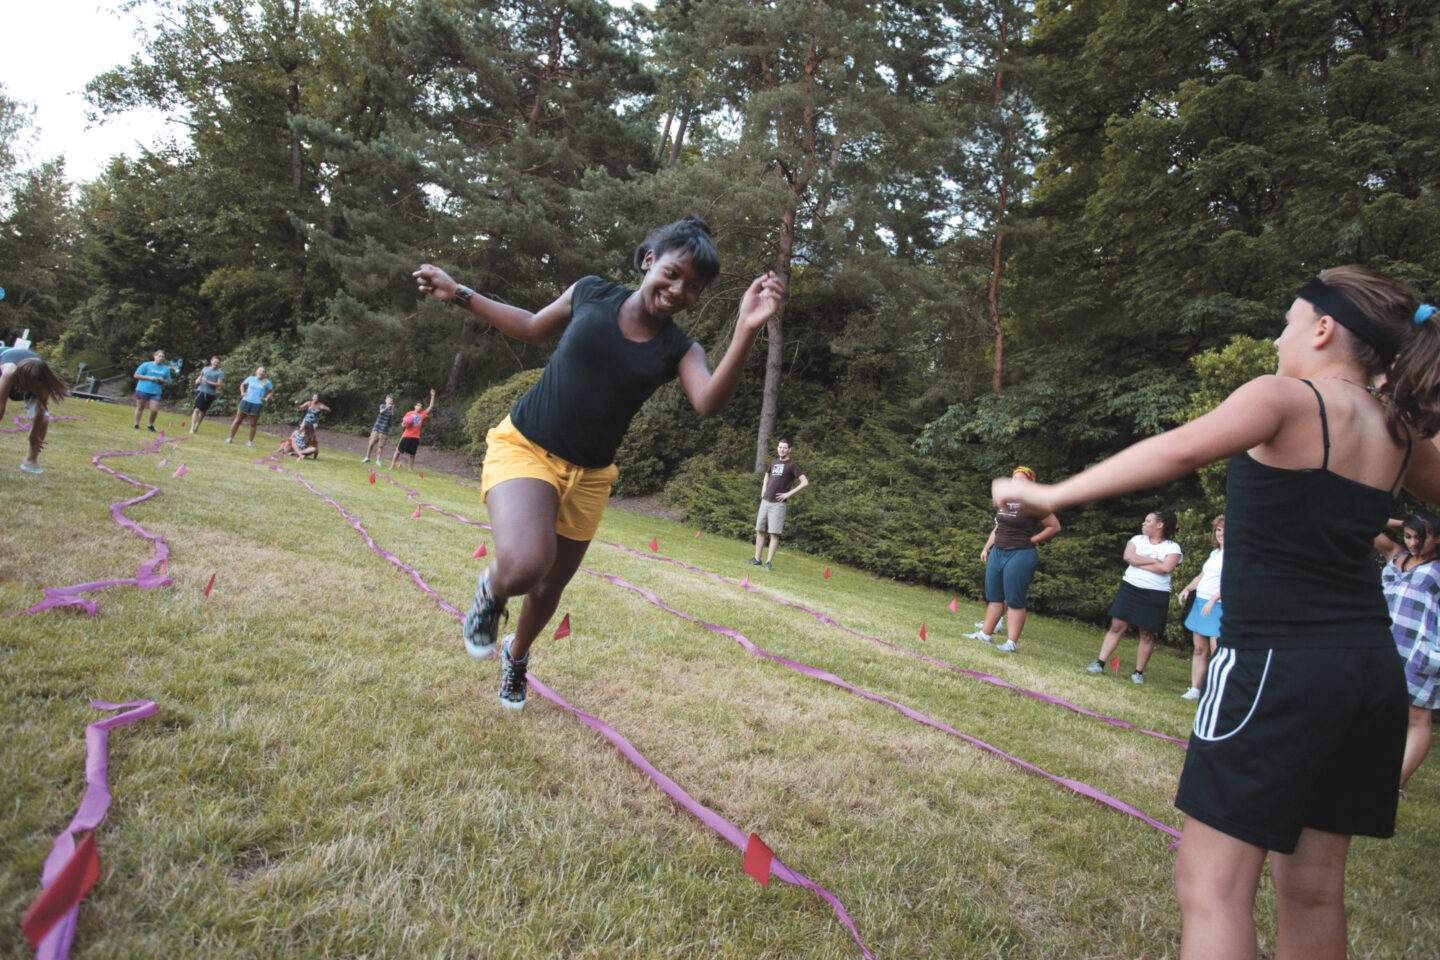 A student participates in physical activity during a school field day